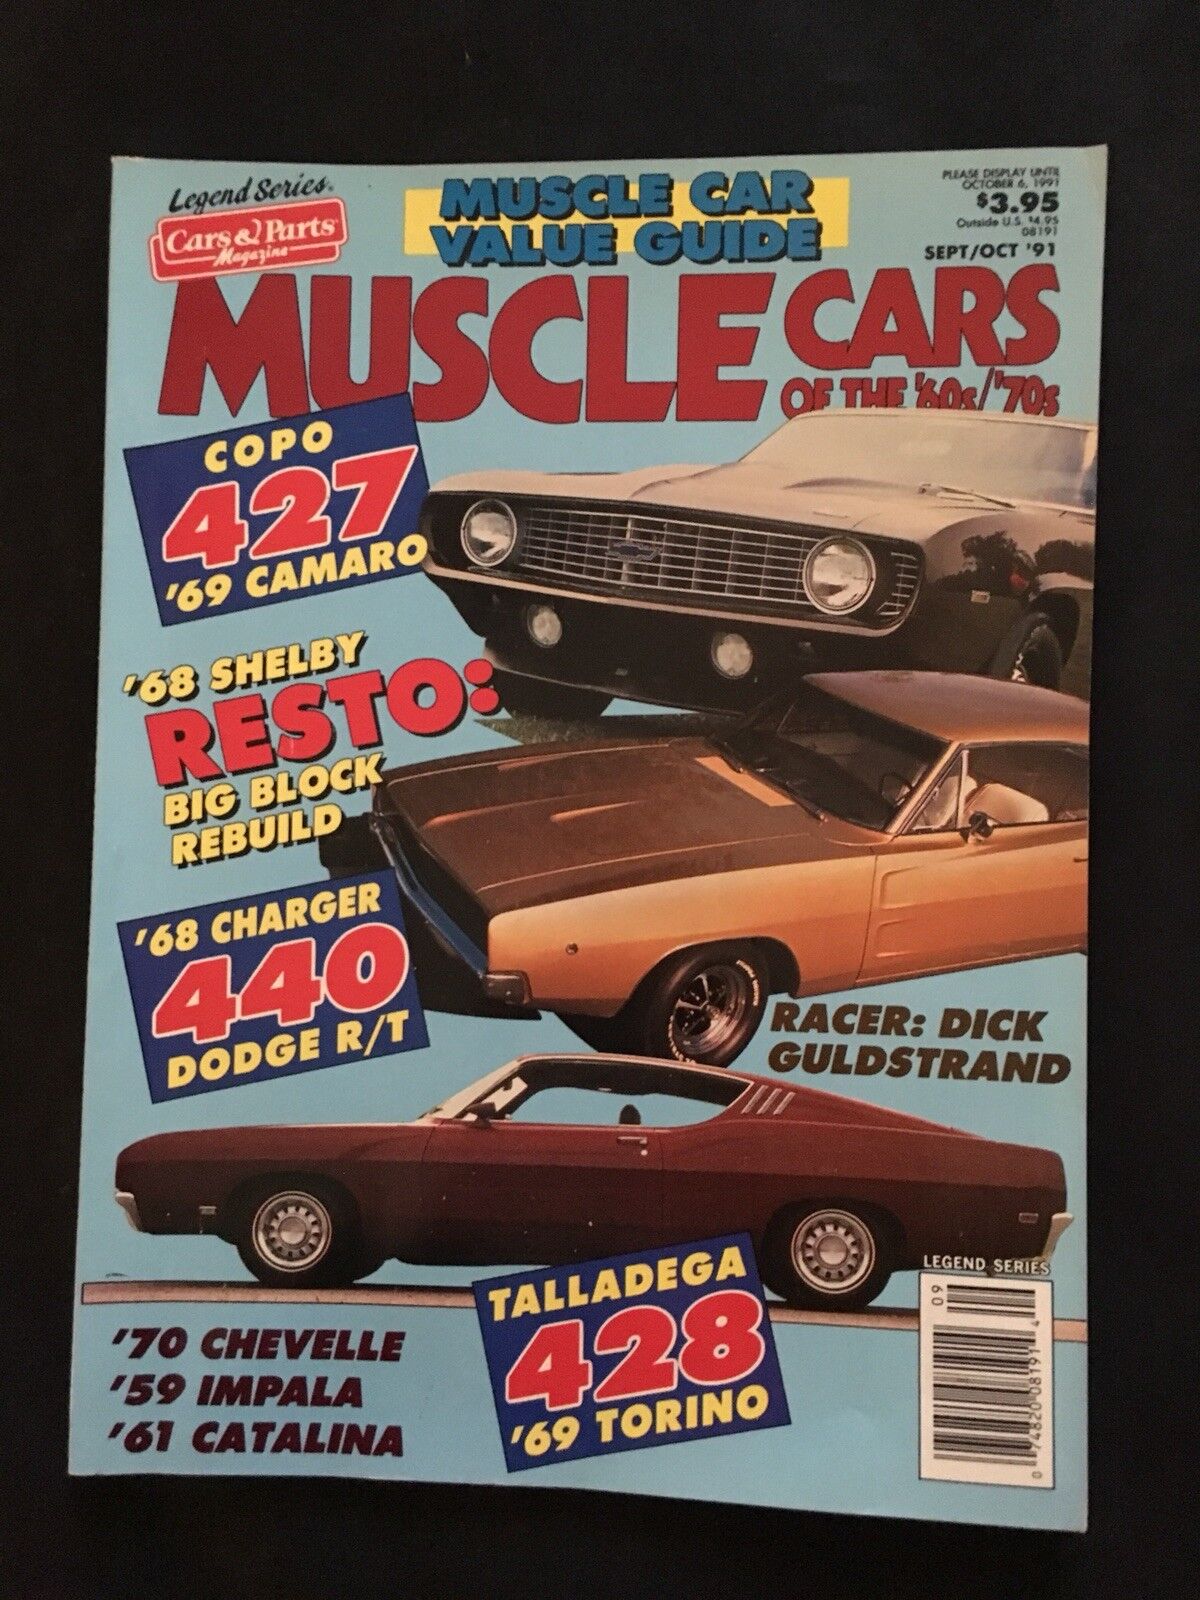 MUSCLE CARS of the 60/70s Legend Series Vol 5 No 5 Sept/Oct 91 Performance Guide